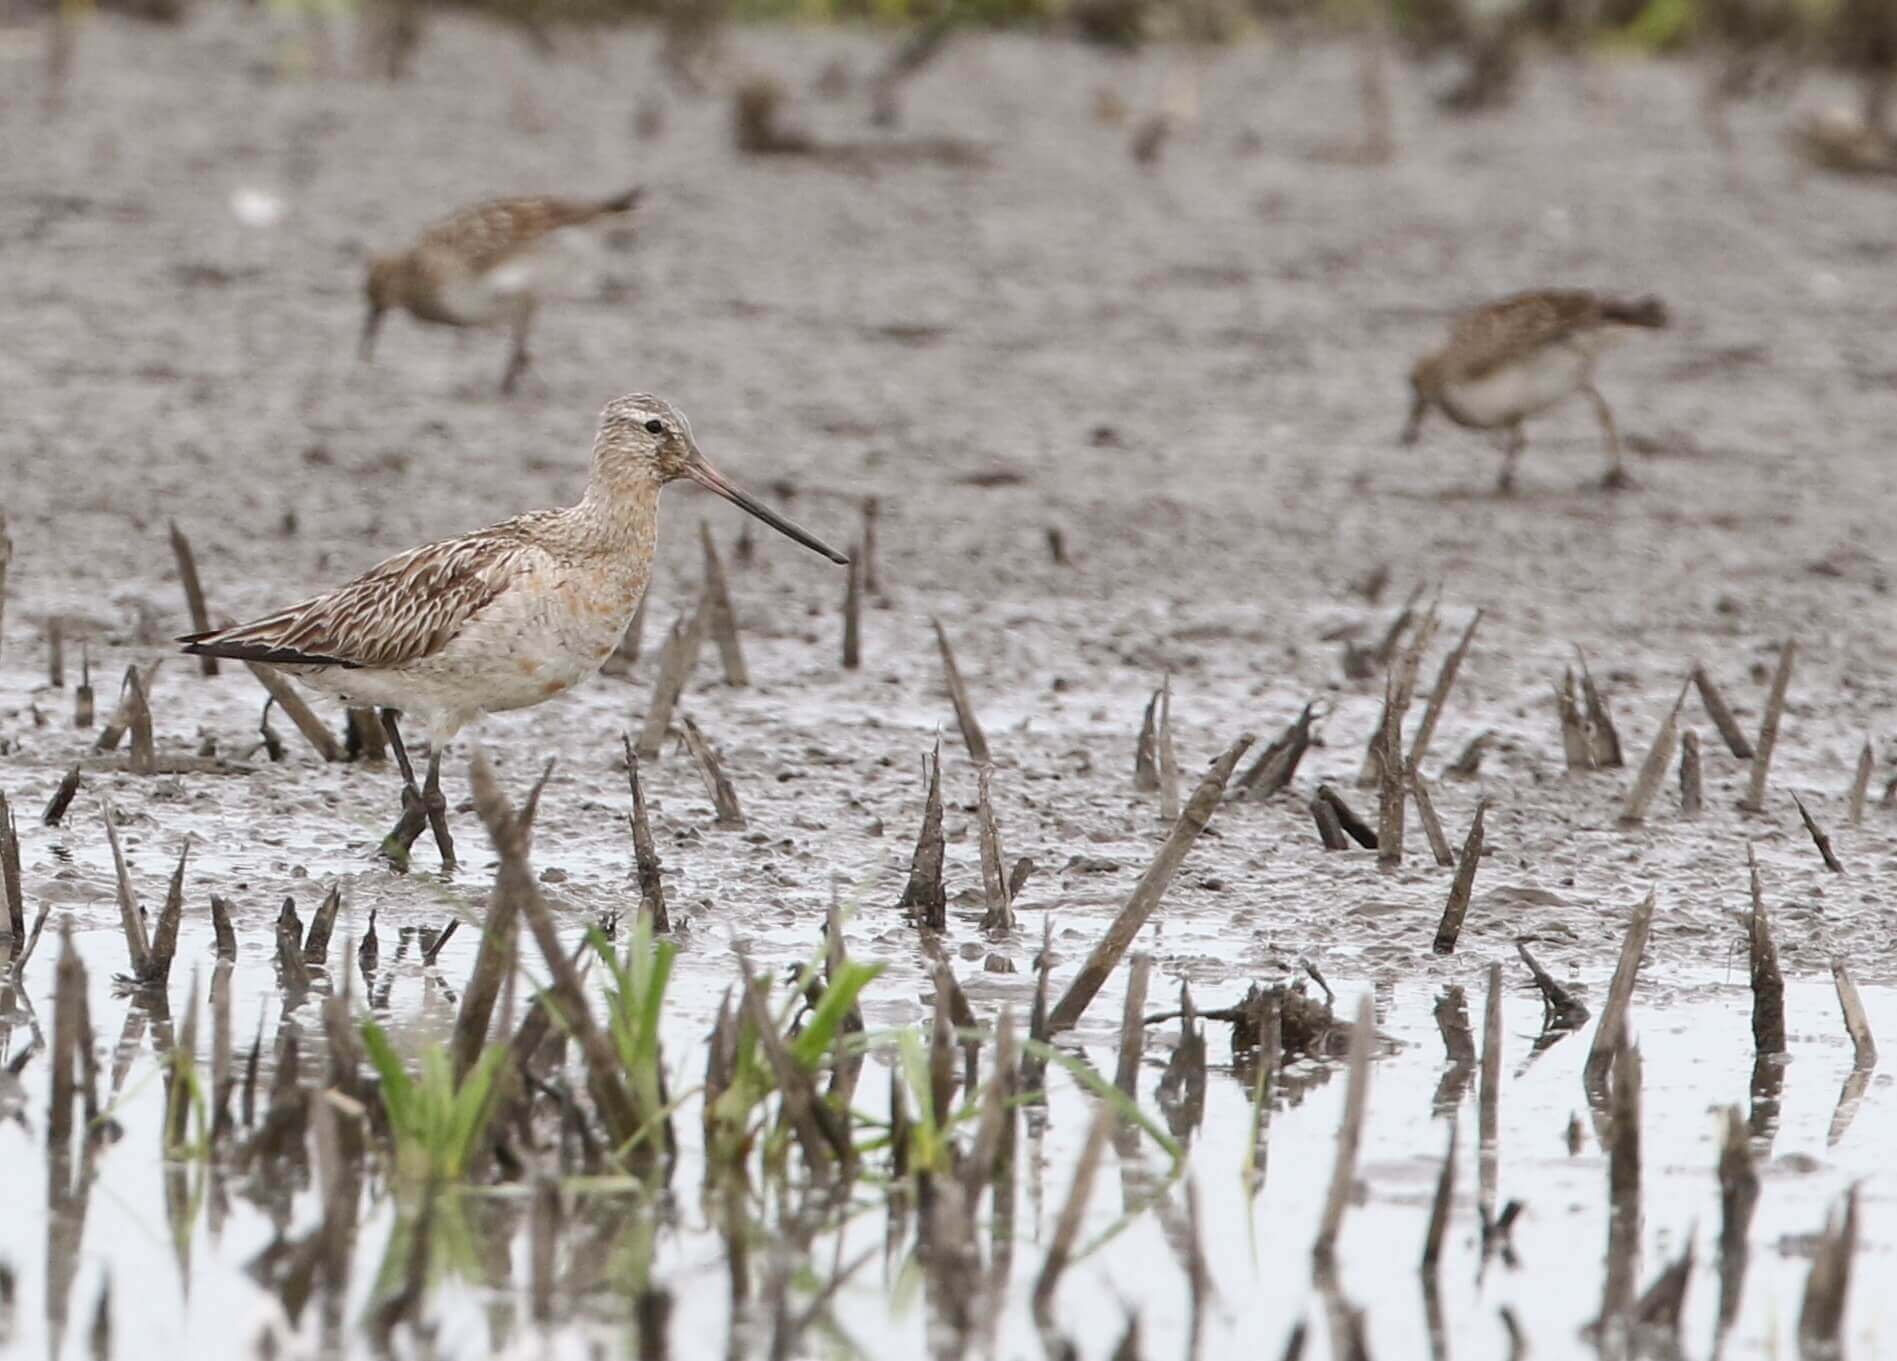 A bar-tailed godwit foraging on freshly exposed mudflats at Lake Red Rock. Water levels are adjusted in the lake to attract shorebirds during migration periods. Exposed mudflats are ideal habitat and provide foraging opportunities for shorebirds.